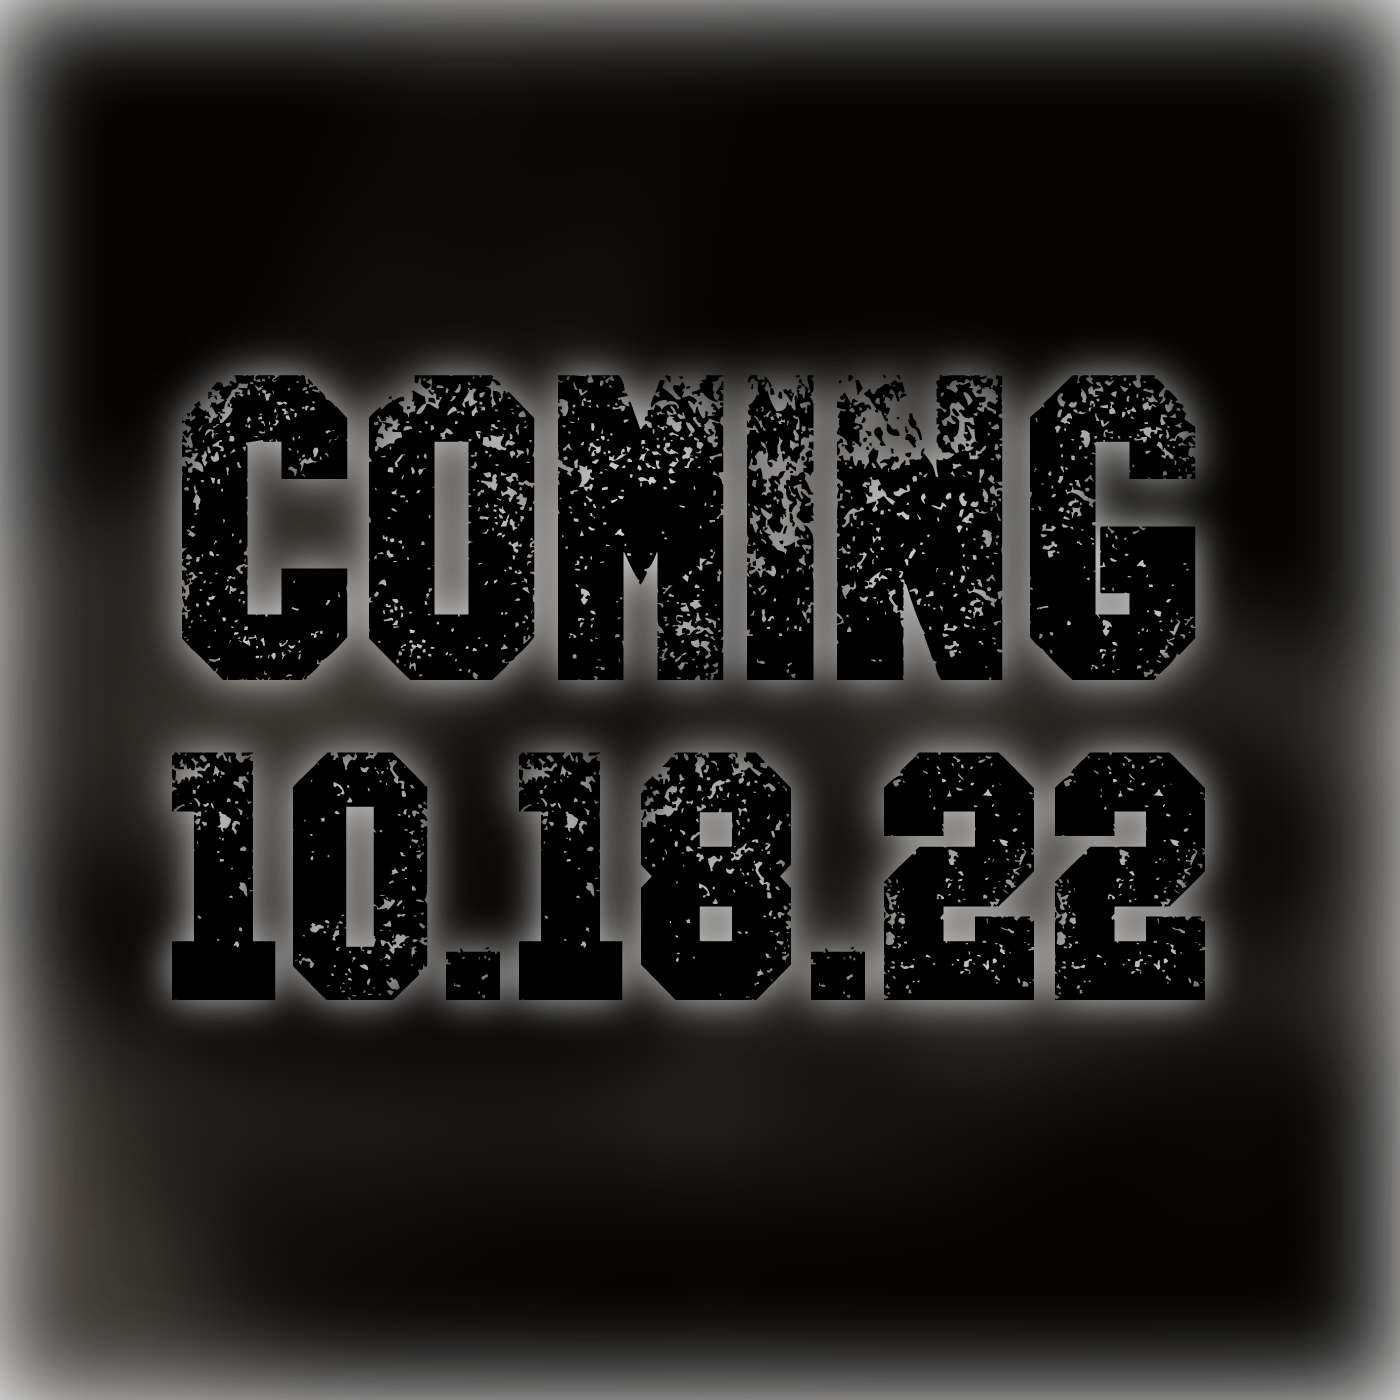 Coming 10.18.22